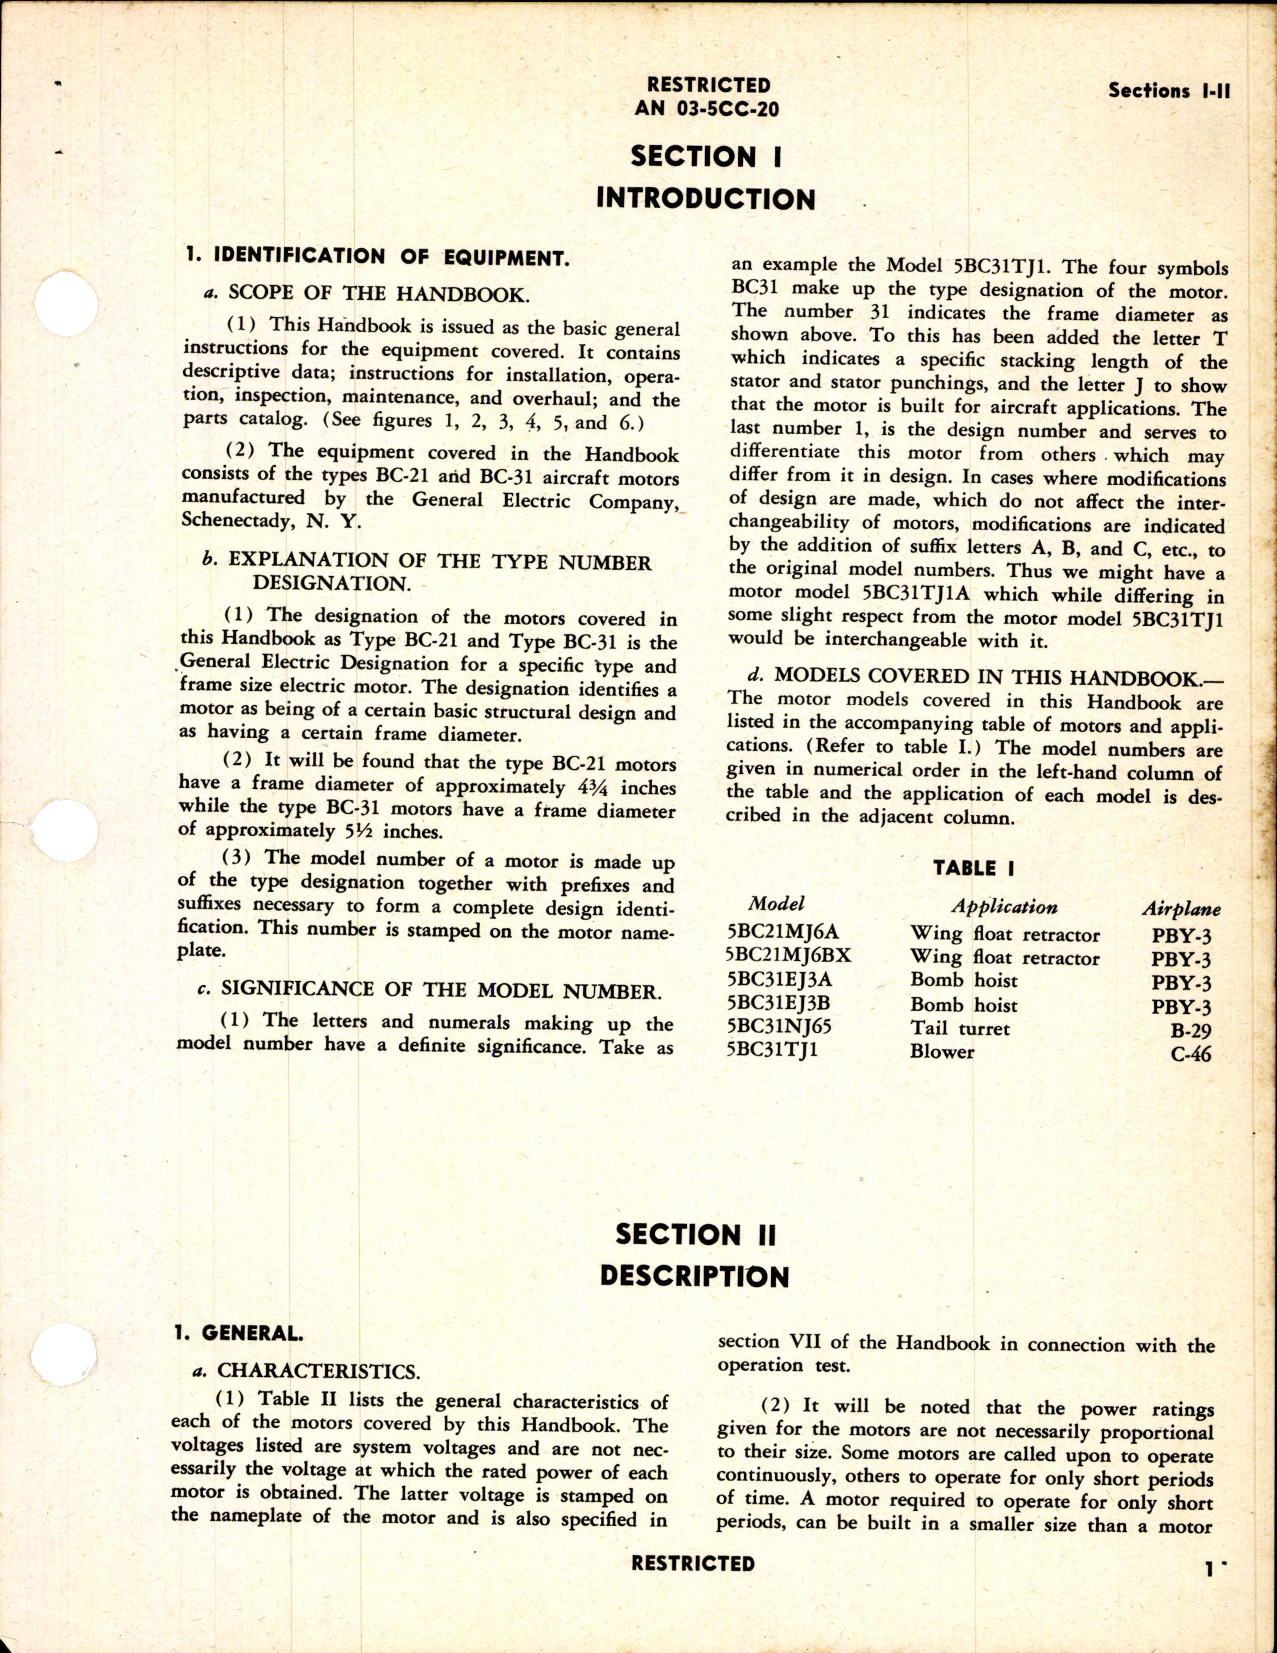 Sample page 3 from AirCorps Library document: Instructions w PC for Models 5BC21 and 5BC31 Series